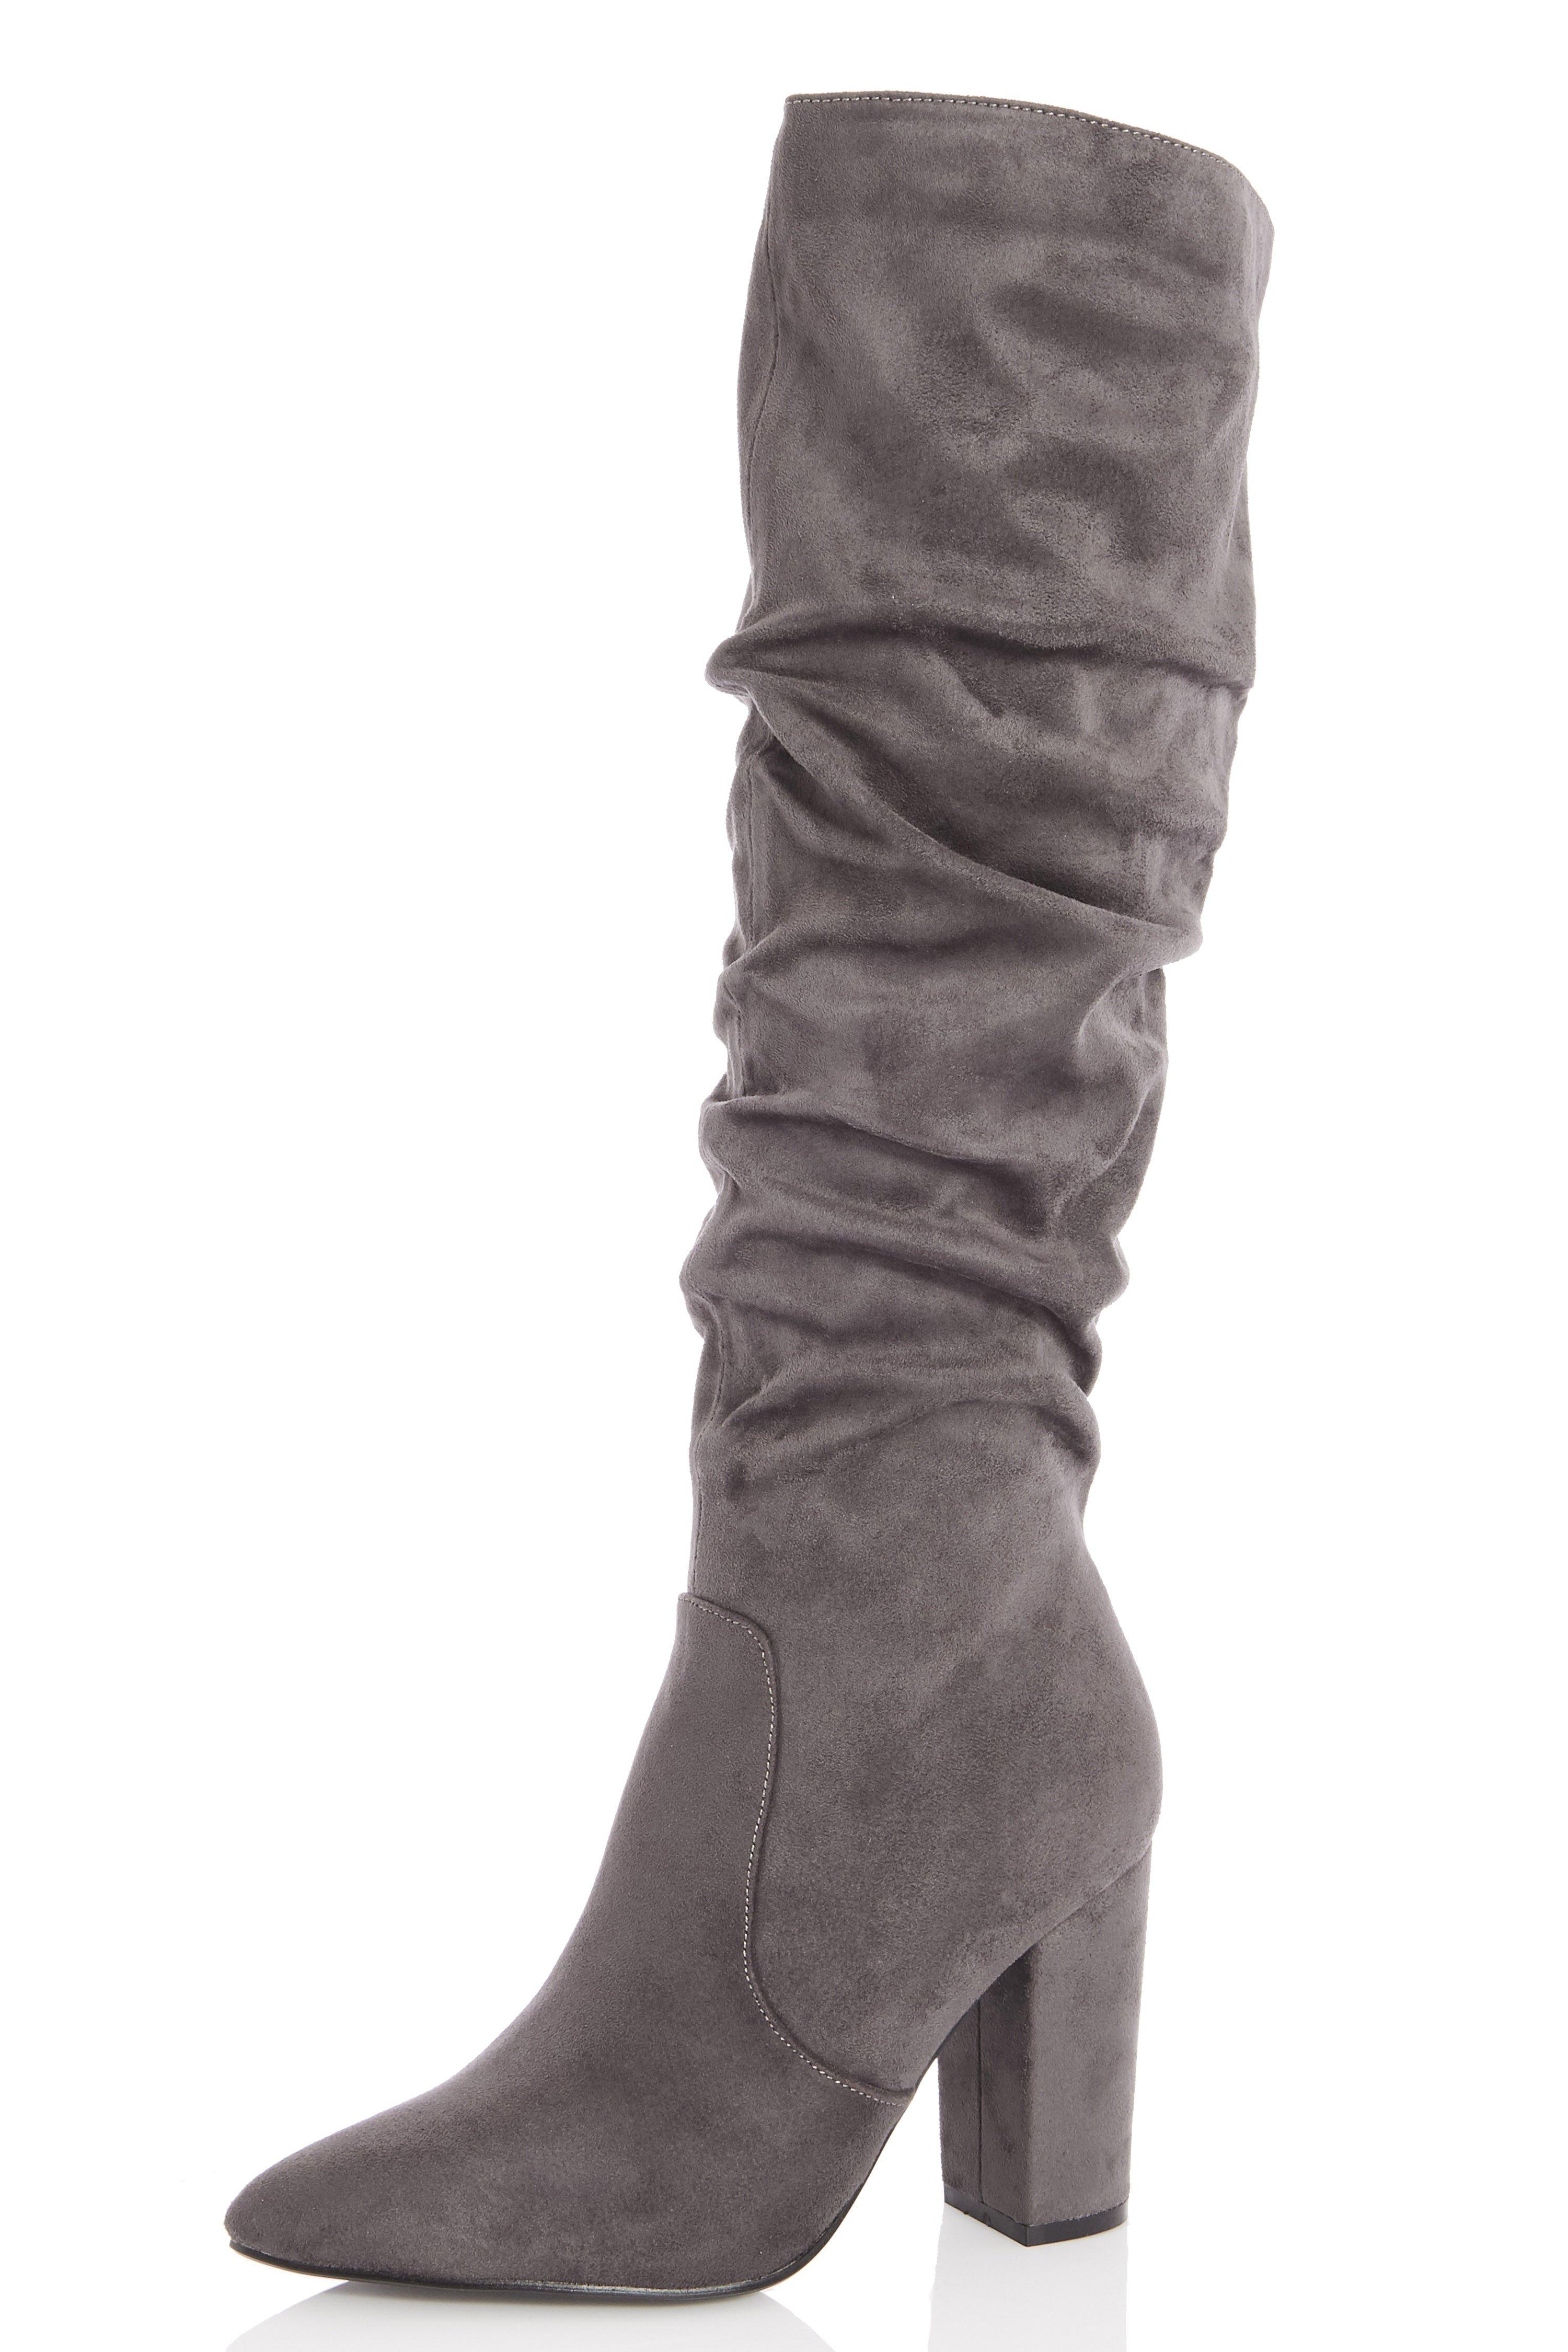 Grey Faux Suede Ruched Knee High Boots - Quiz Clothing